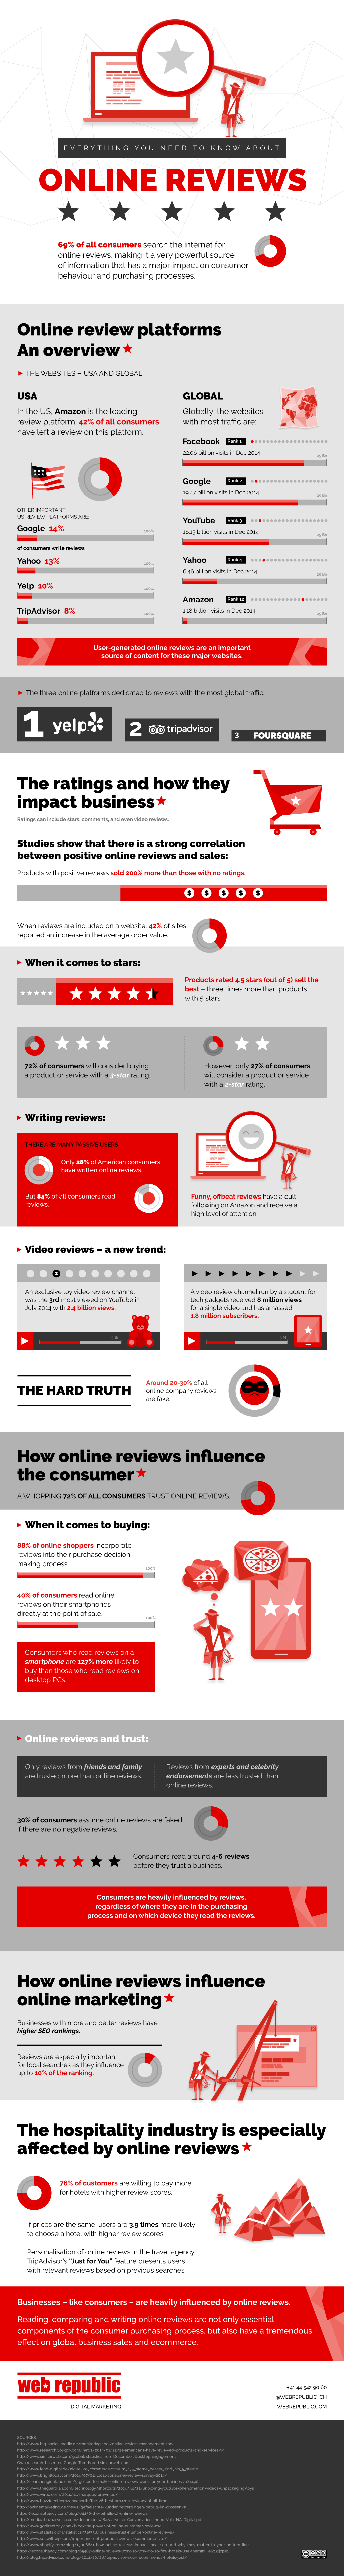 Everything You Need to Know about Online Reviews - #infographic